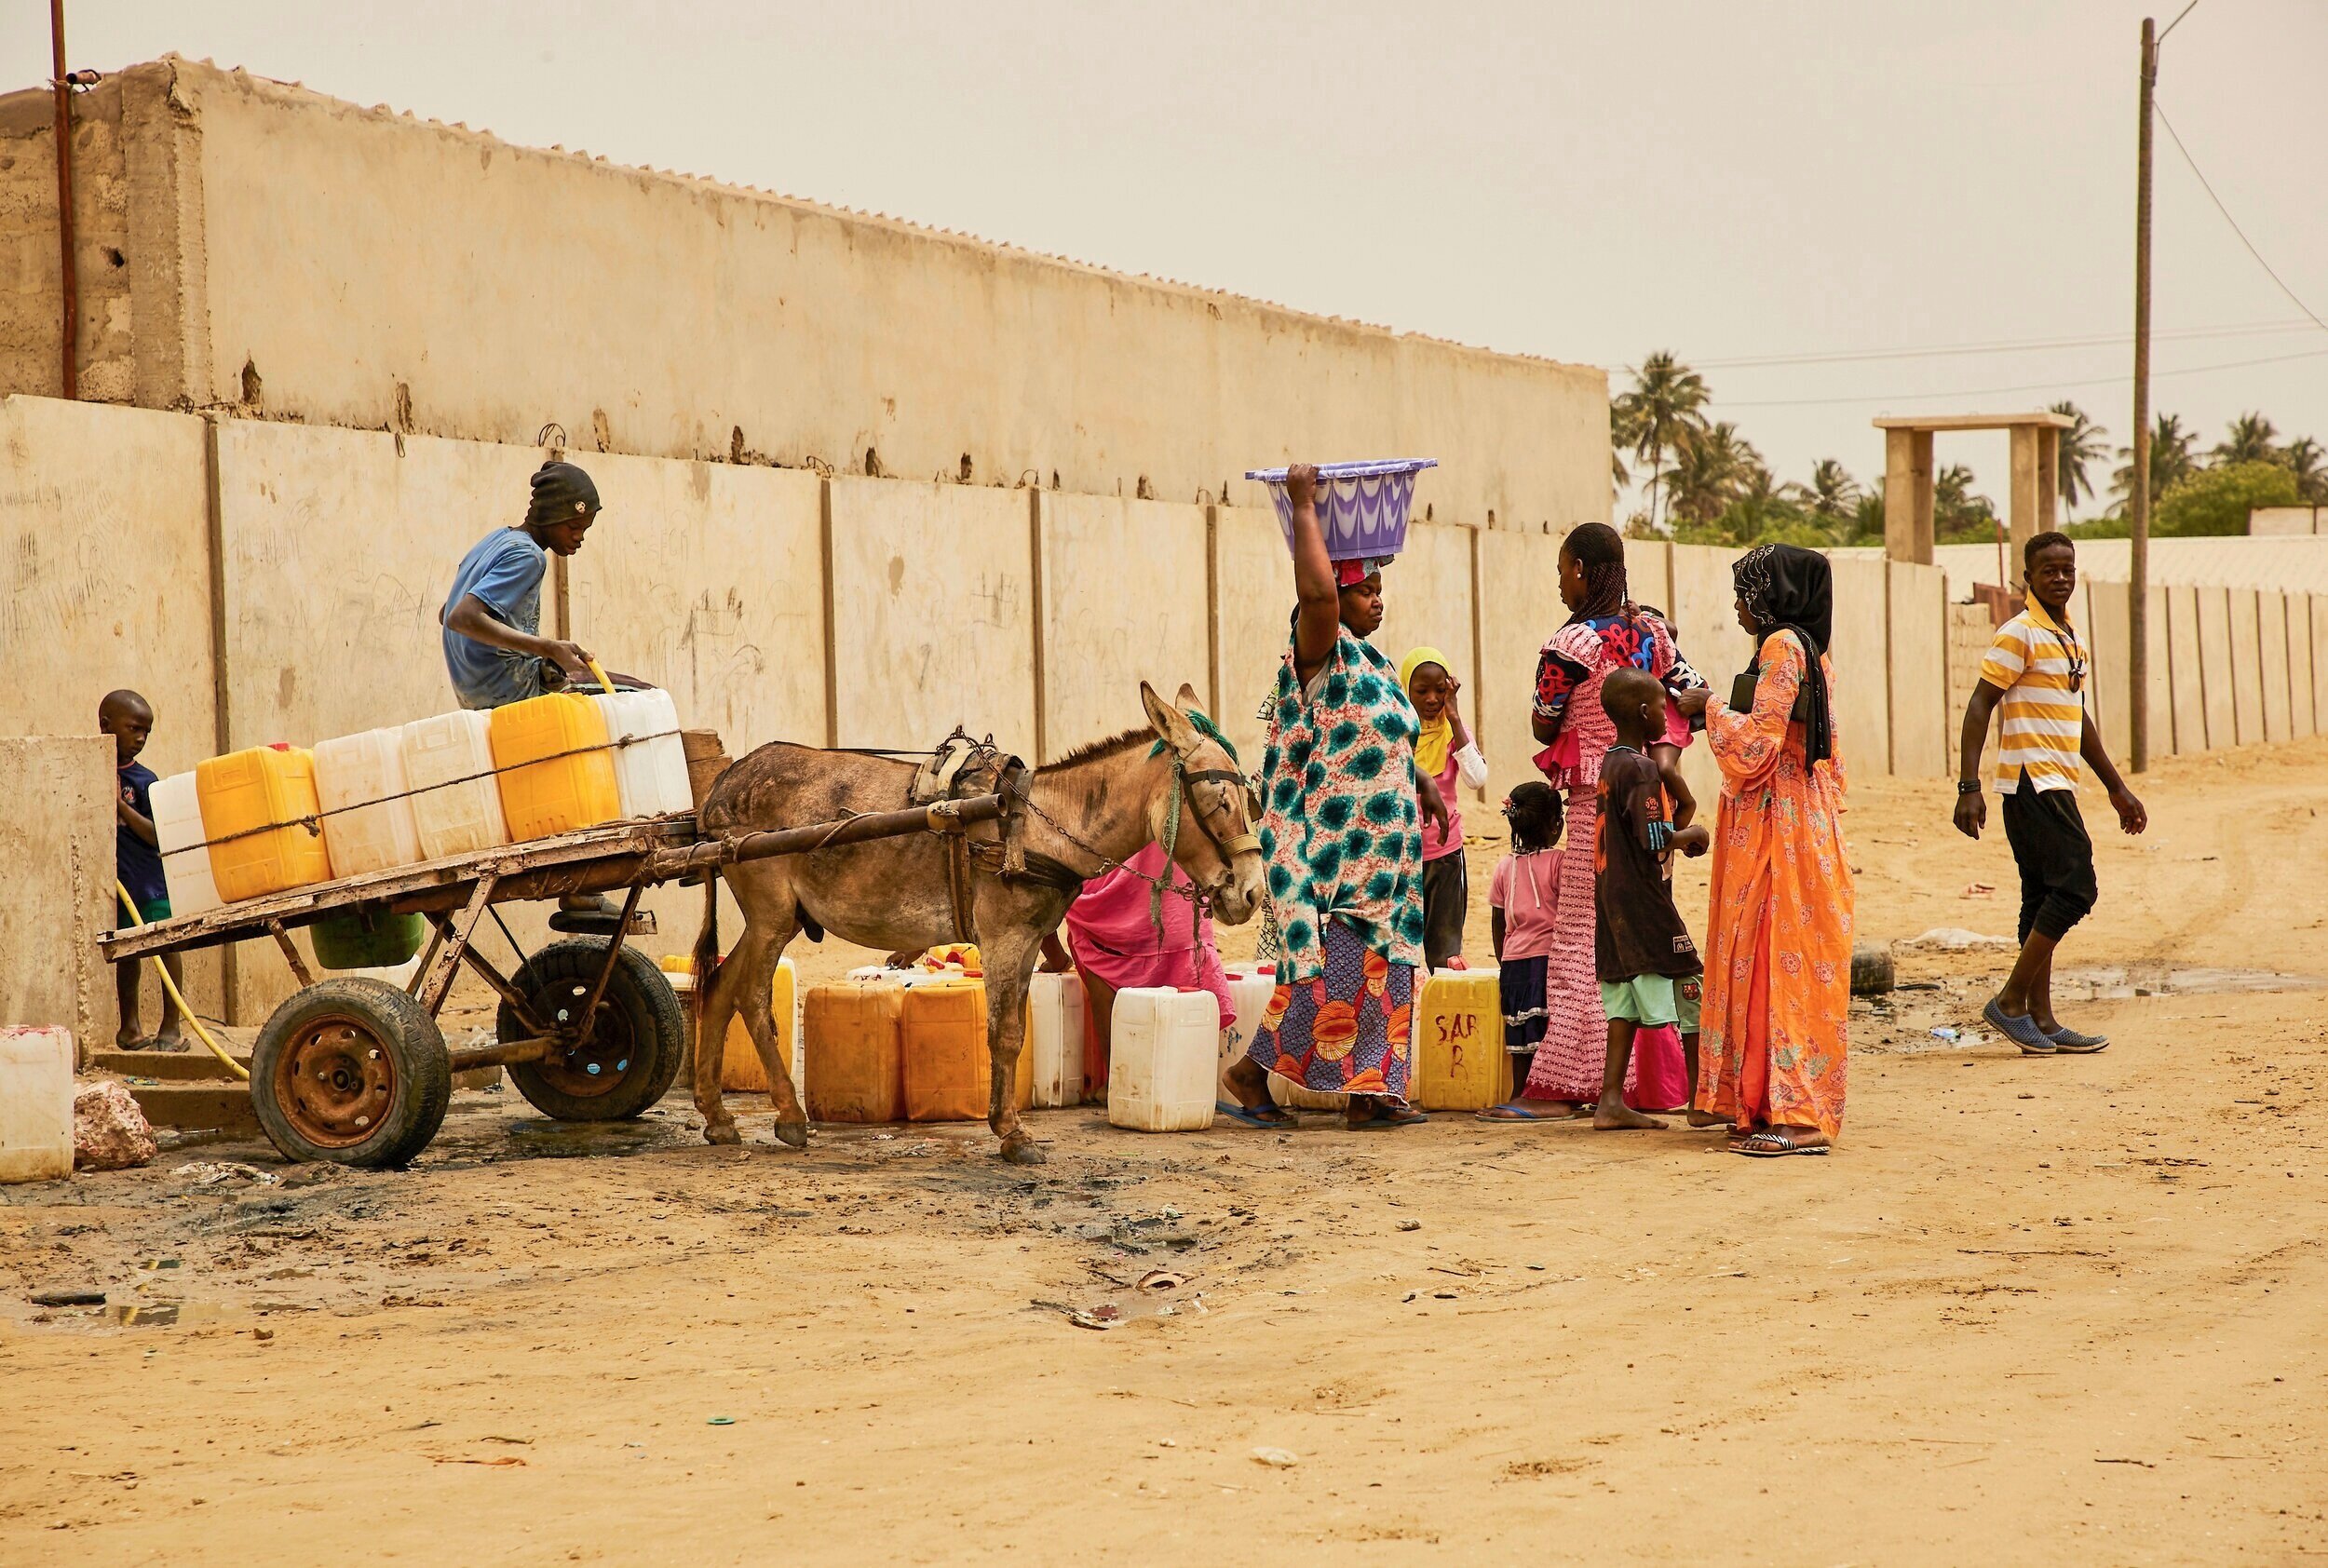  Residents of Khar Yalla camp– the “temporary” site where people whose homes have been destroyed are relocated– queue for water.  The arid land at the camp is not connected to sufficient water lines, so people must collect it from a single tapped sou